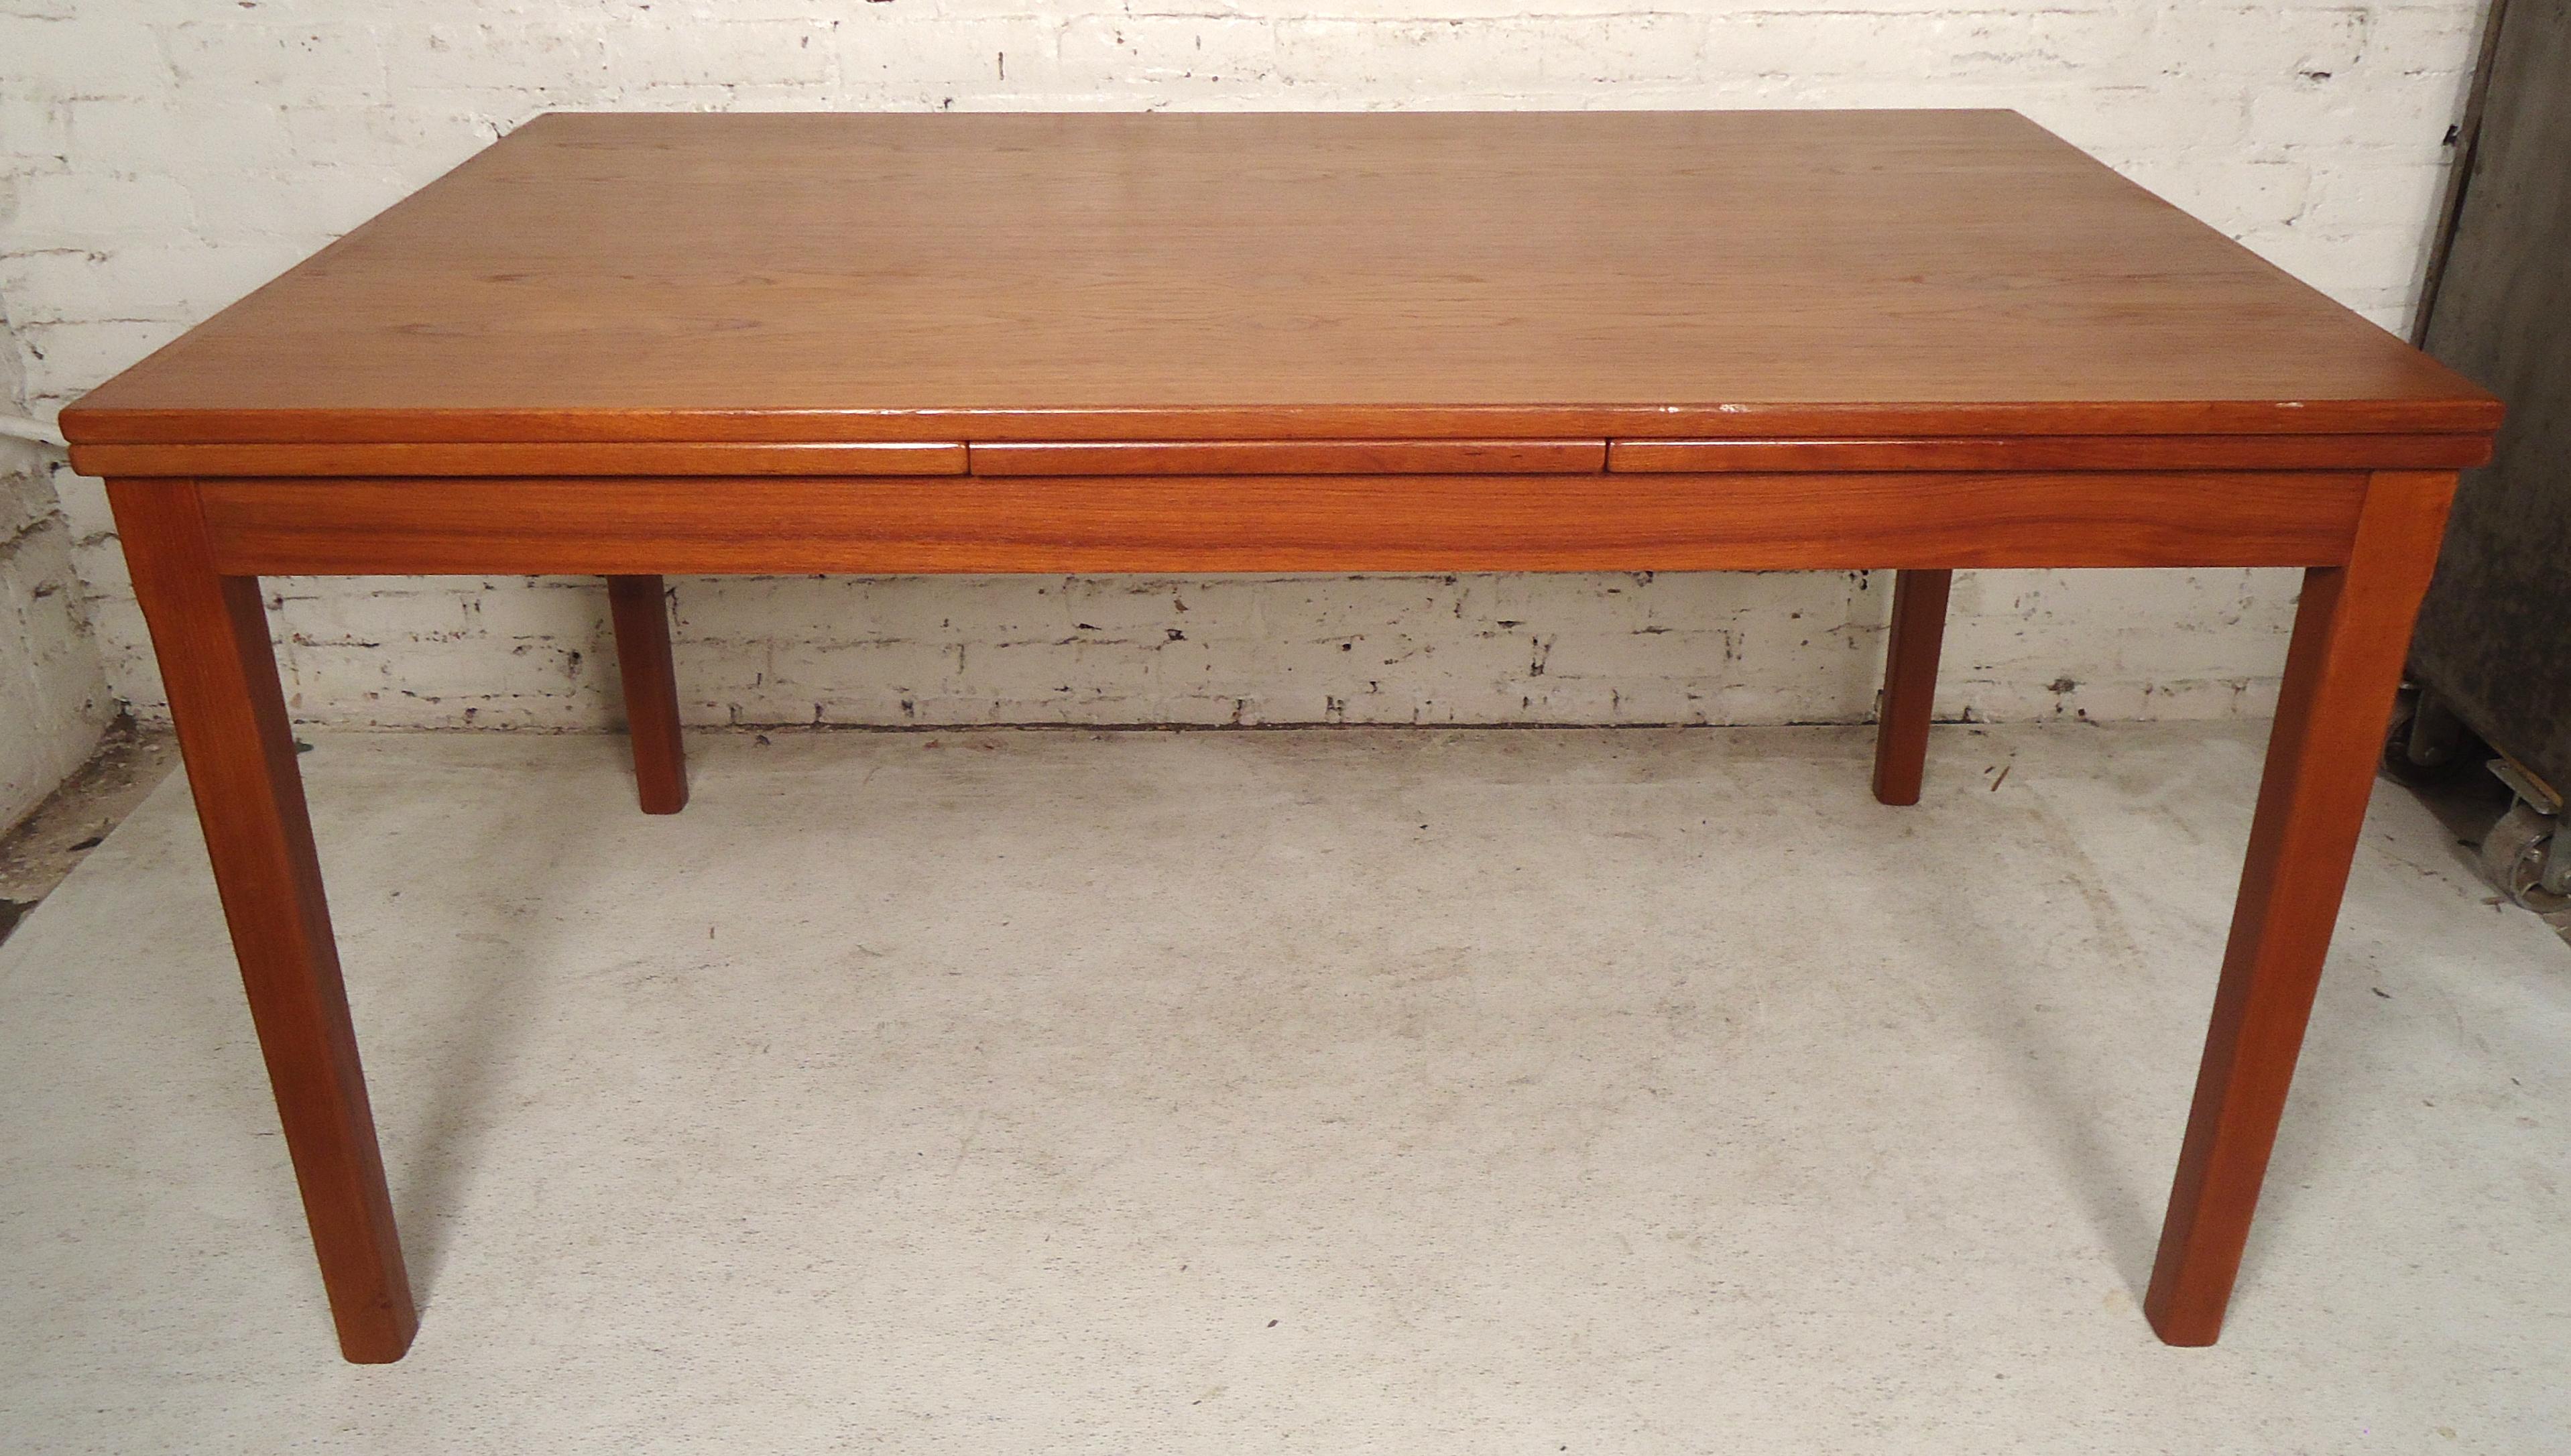 Mid-Century Modern dining table with pullout / pull-out leaves. Warm teak veneer over wood.
Measures: Closed 54